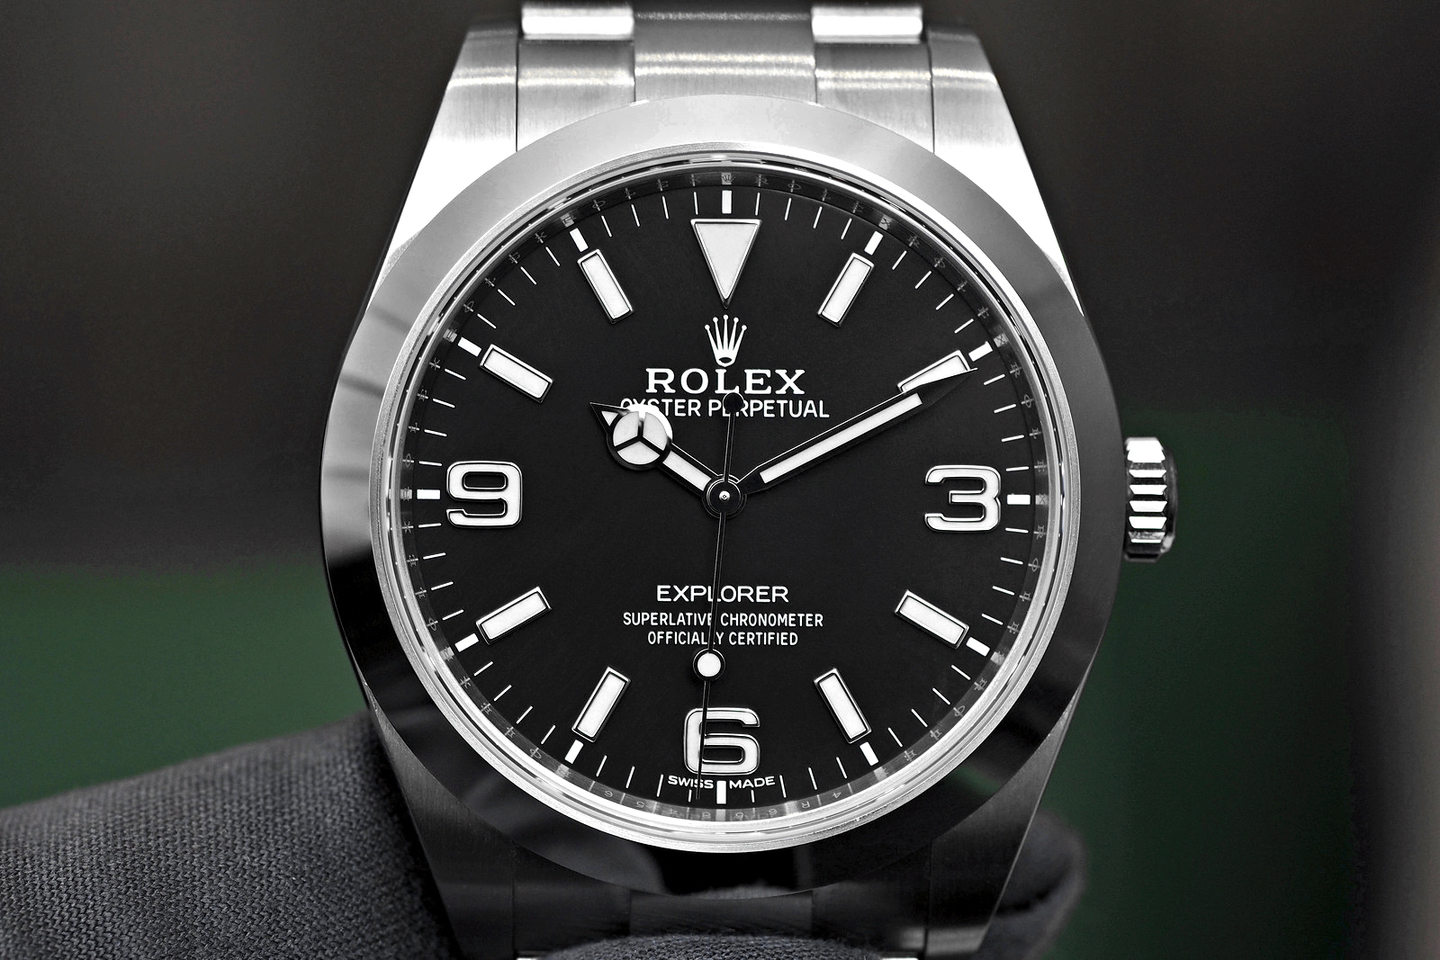 Sharing The new Rolex Explorer Hands-On